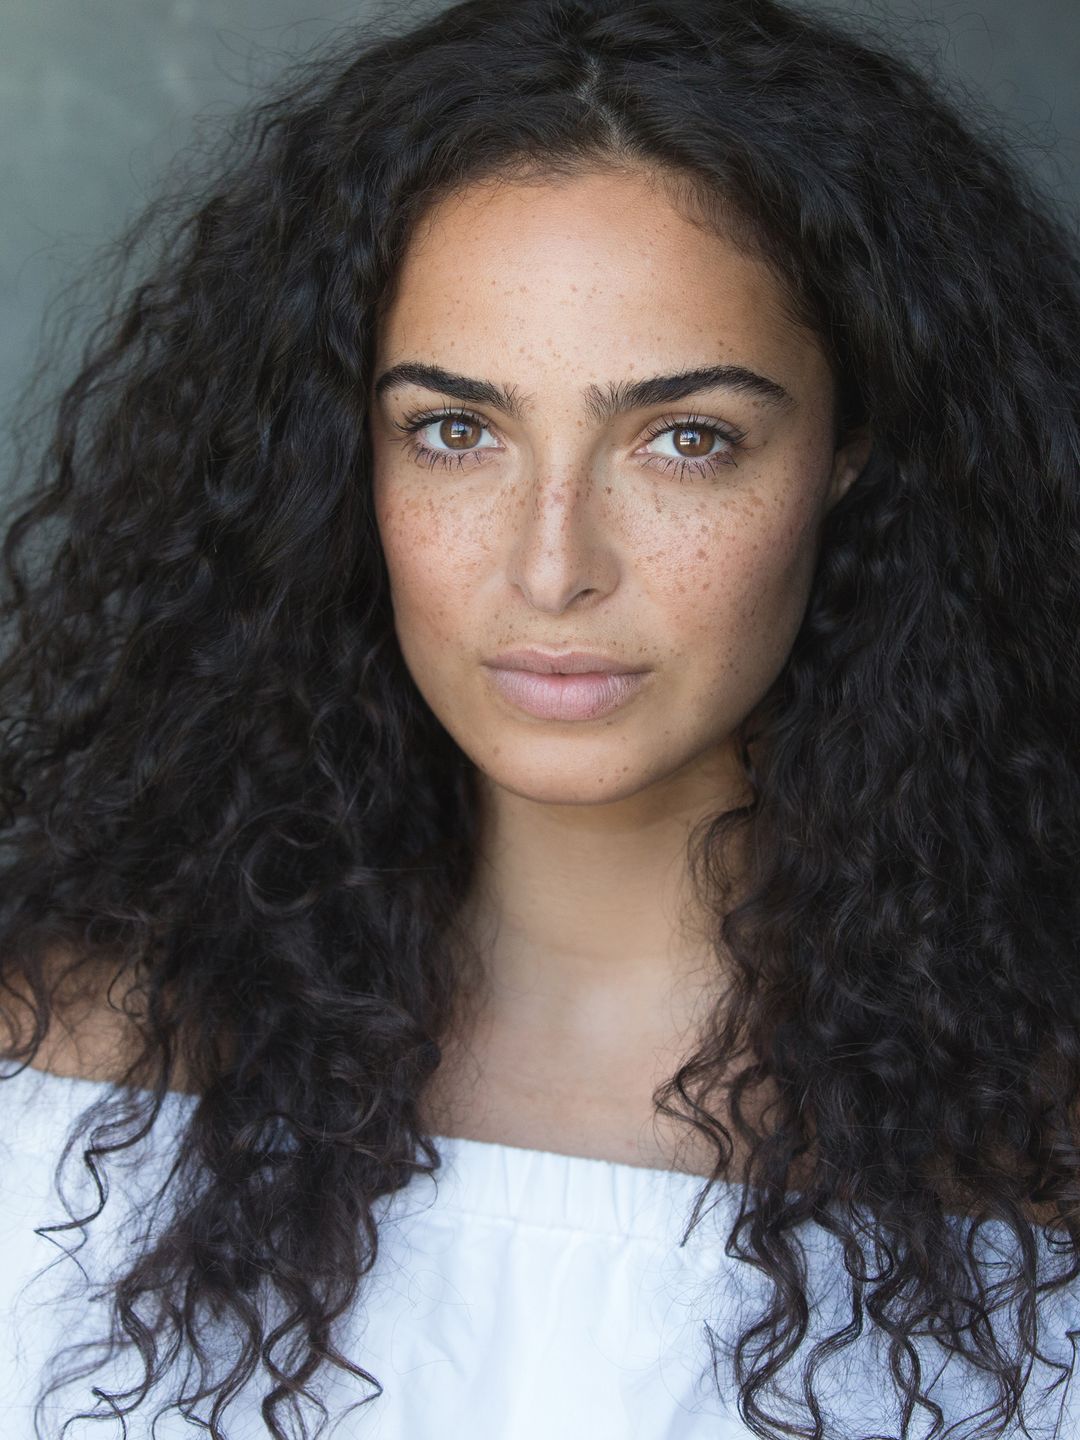 Anna Shaffer unphotoshopped pictures